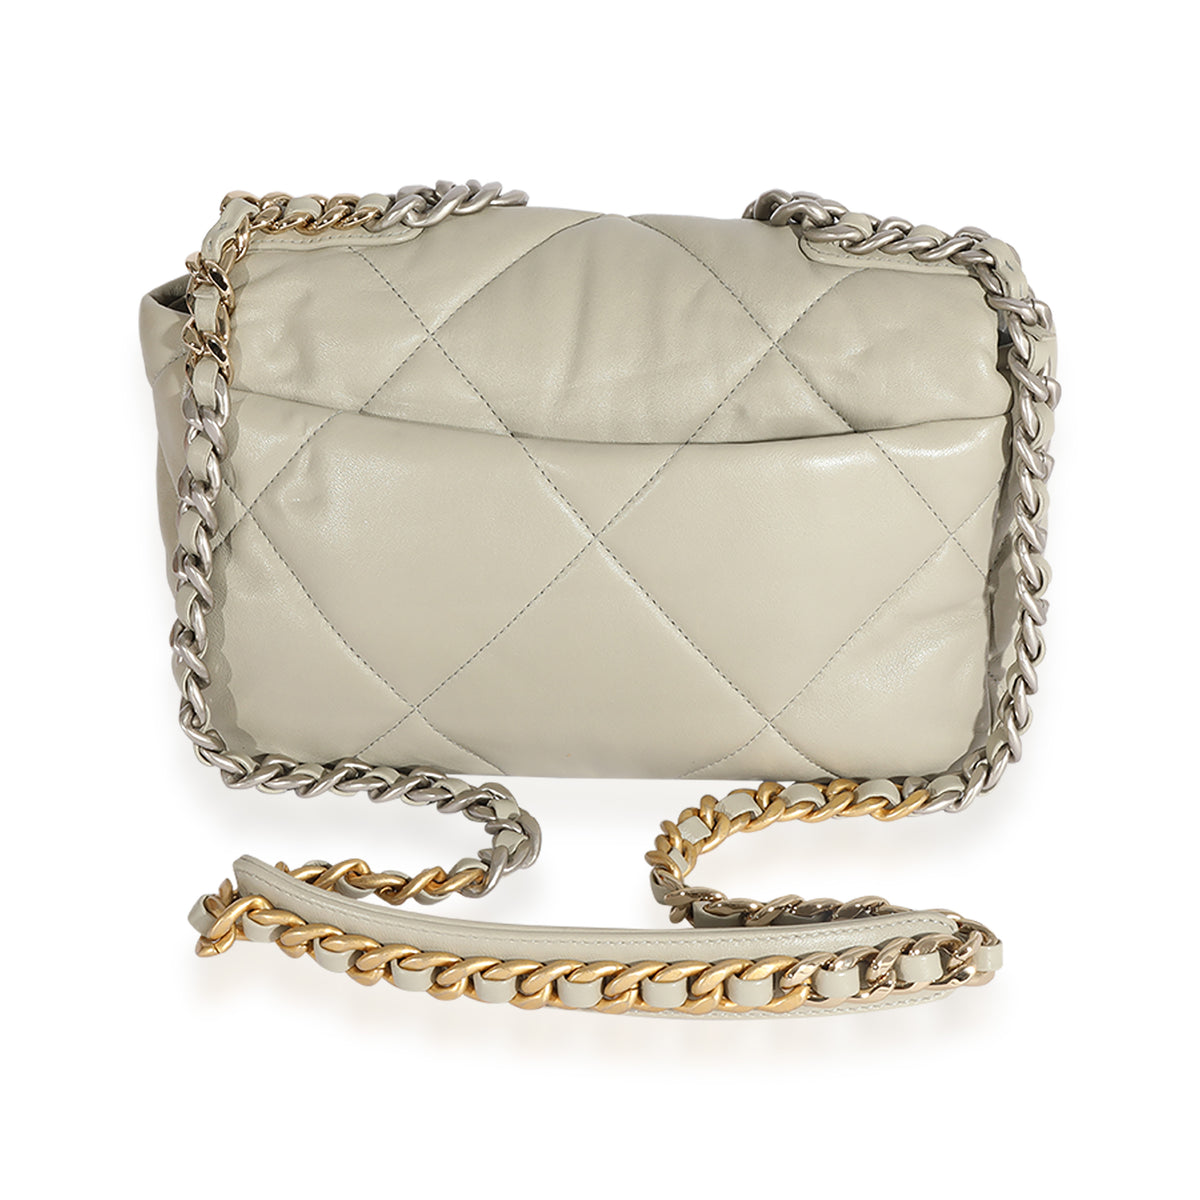 Chanel Cement Gray Quilted Lambskin Medium Chanel 19 Bag